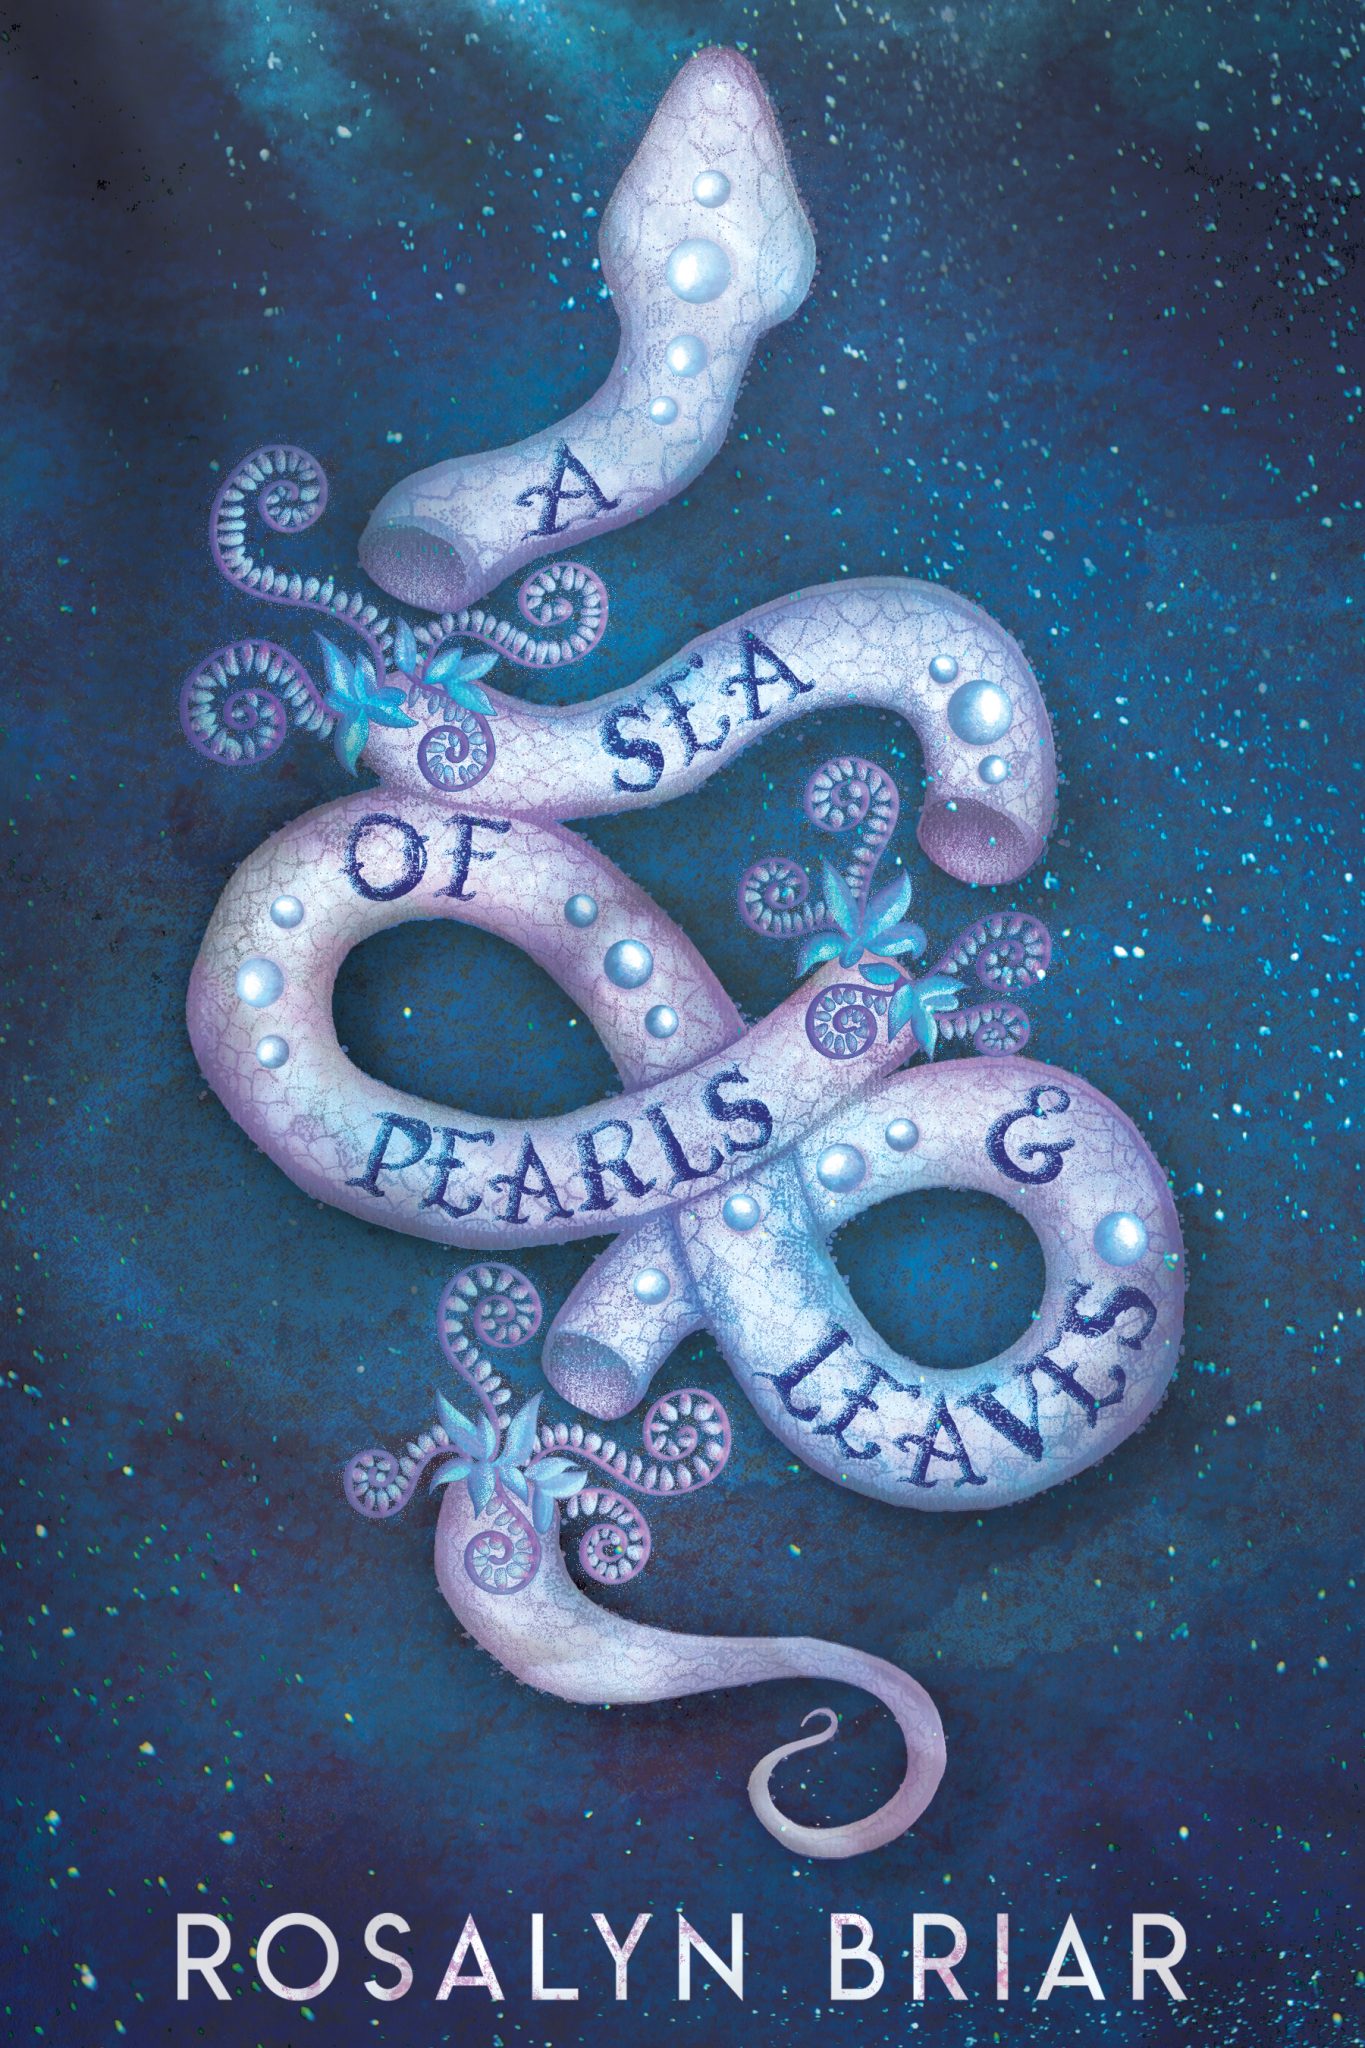 A Sea of Pearls & Leaves by Rosalyn Briar